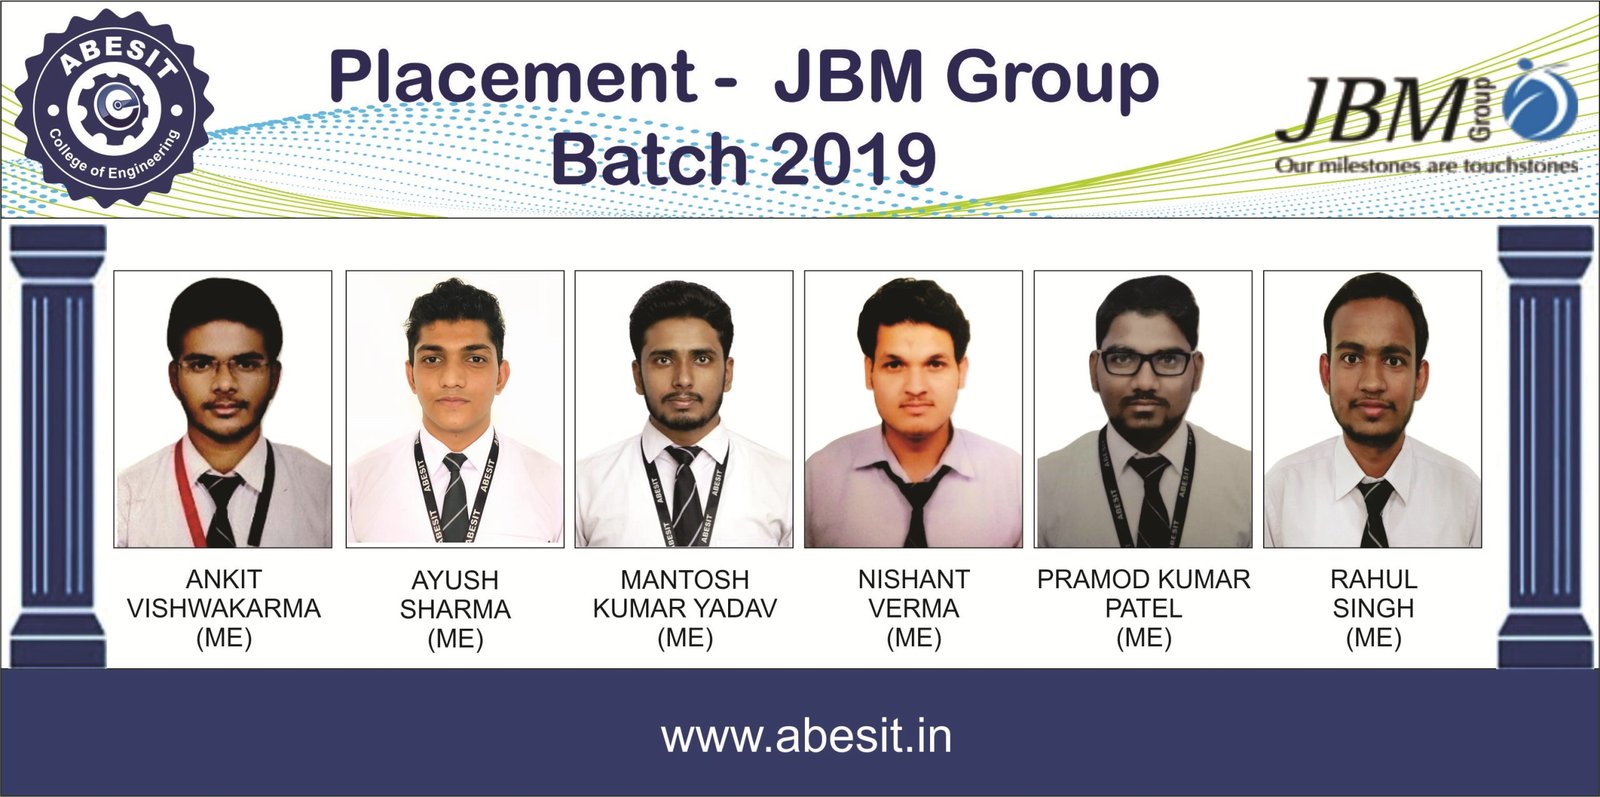 Additional selections in JBM Group